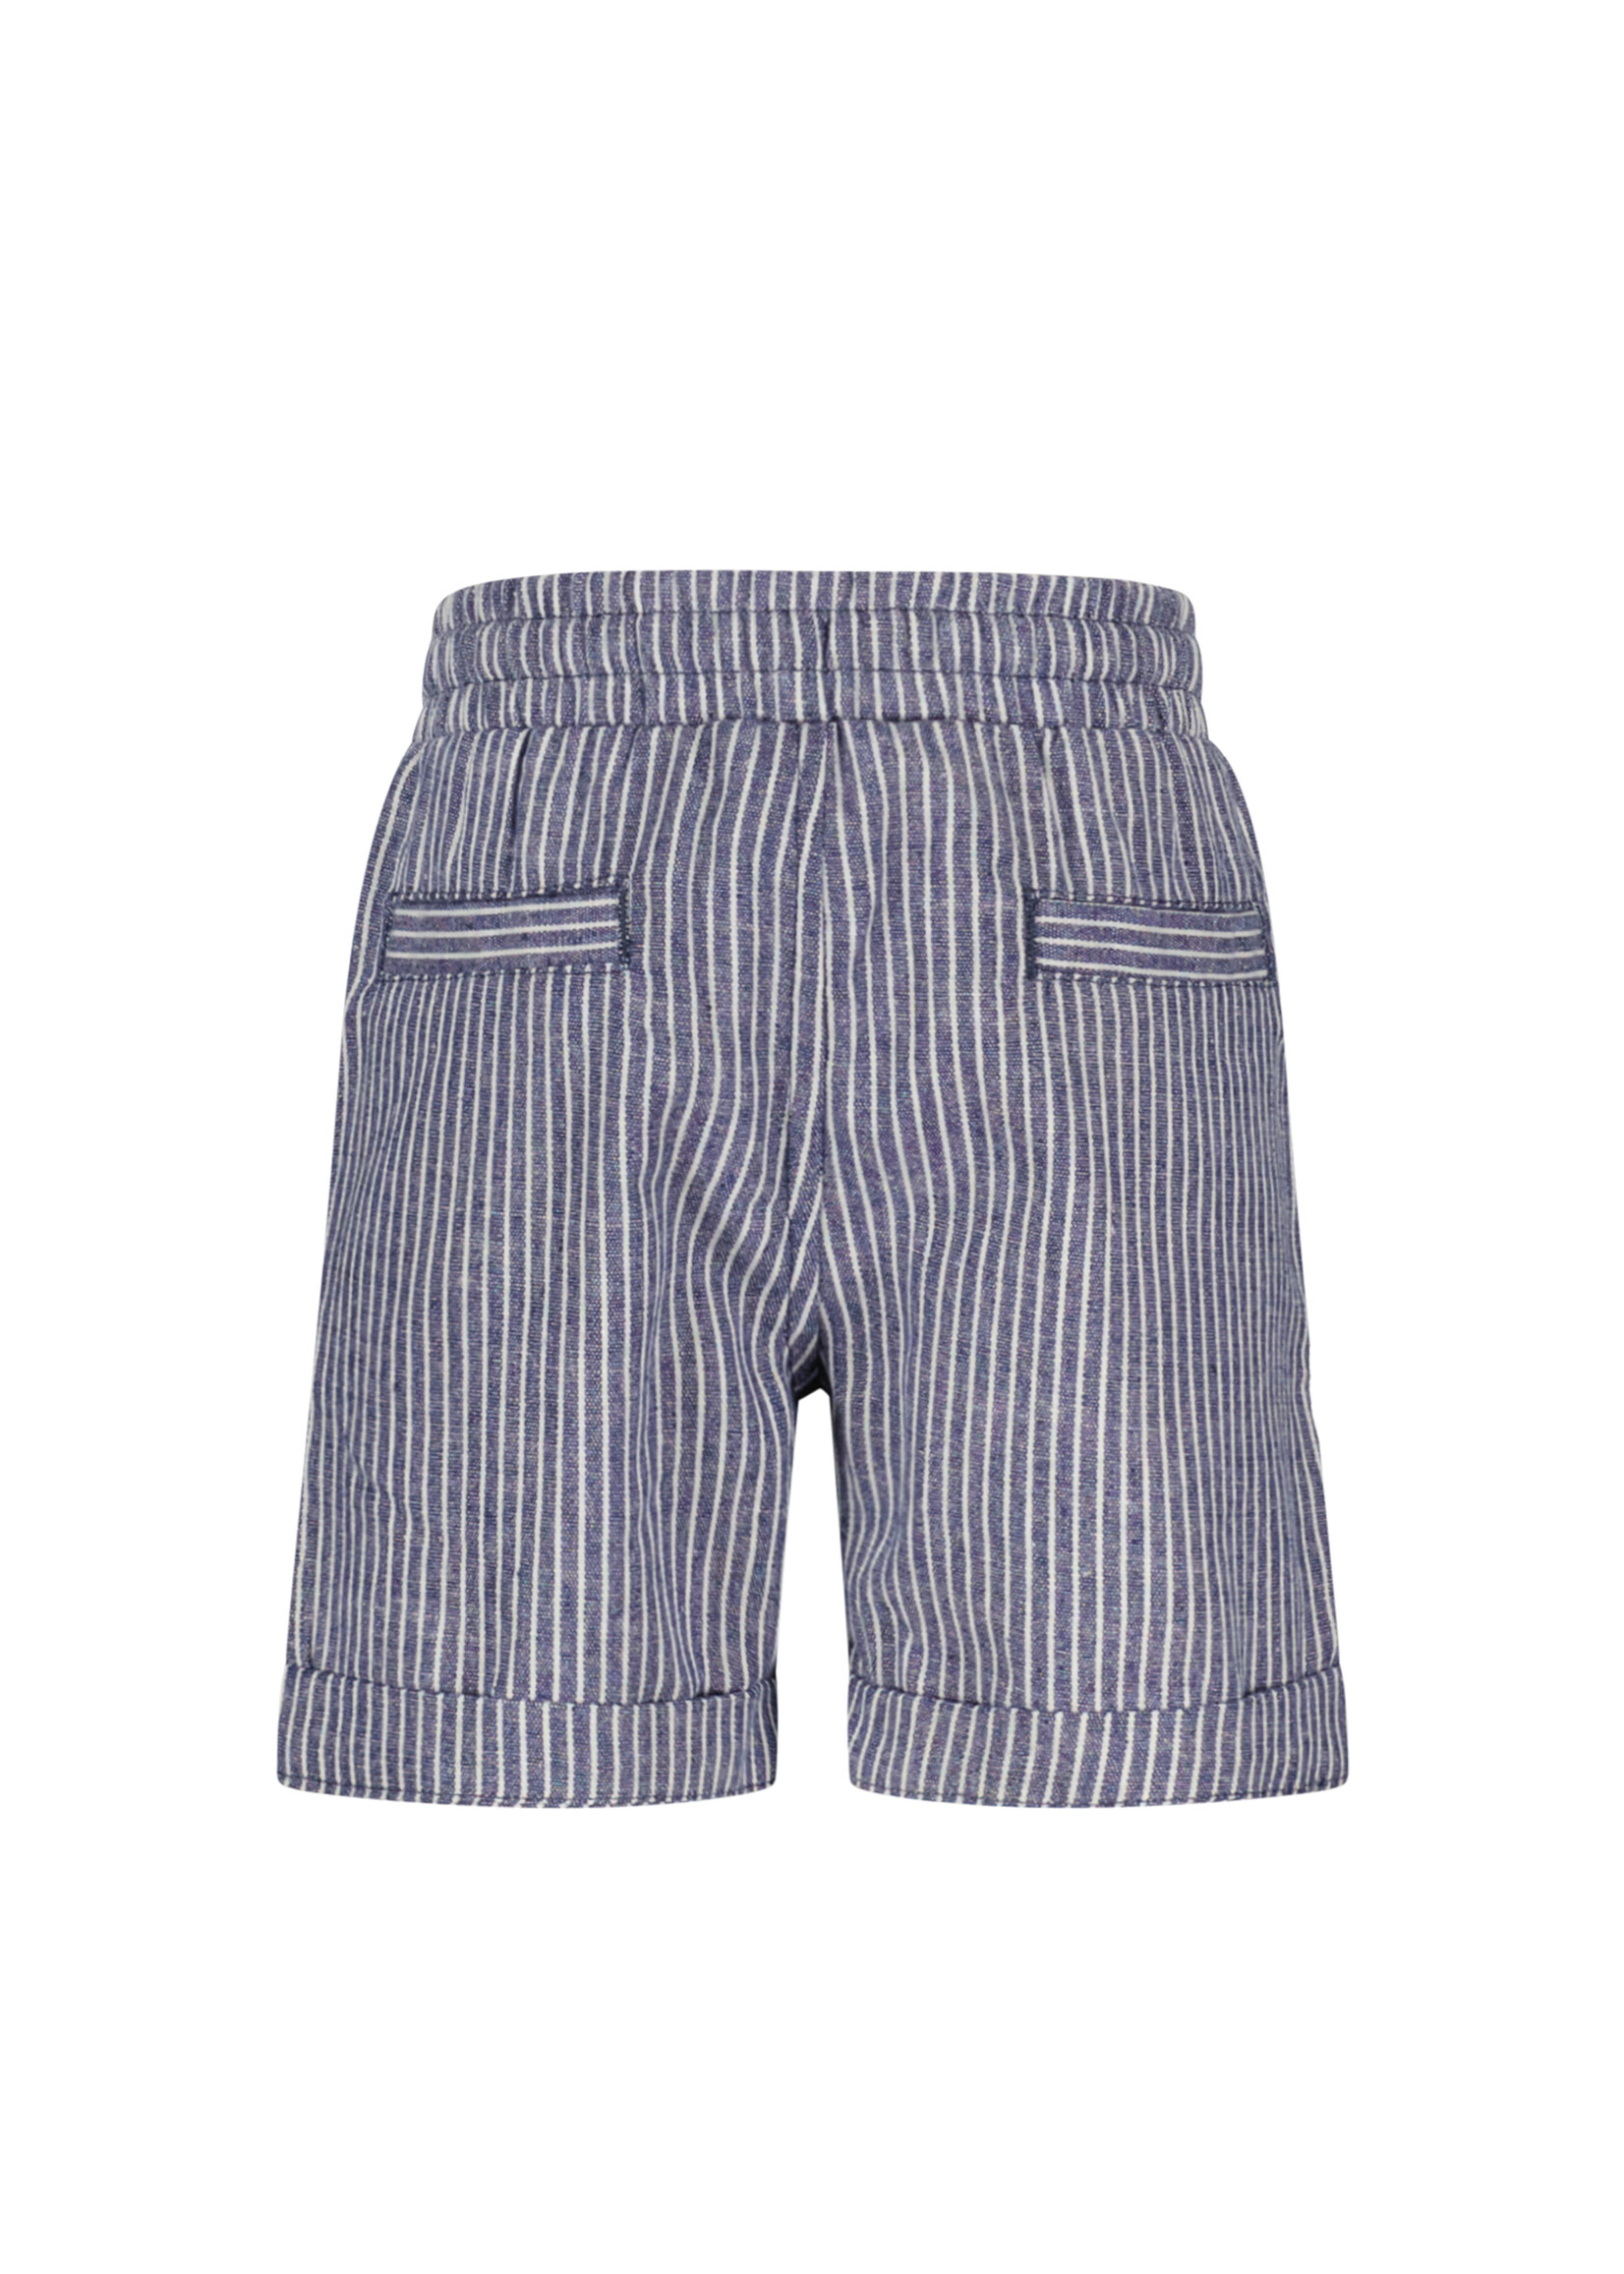 Le Chic Boys Baby L312-8662 DEUCY striped shorts Navy Stripes